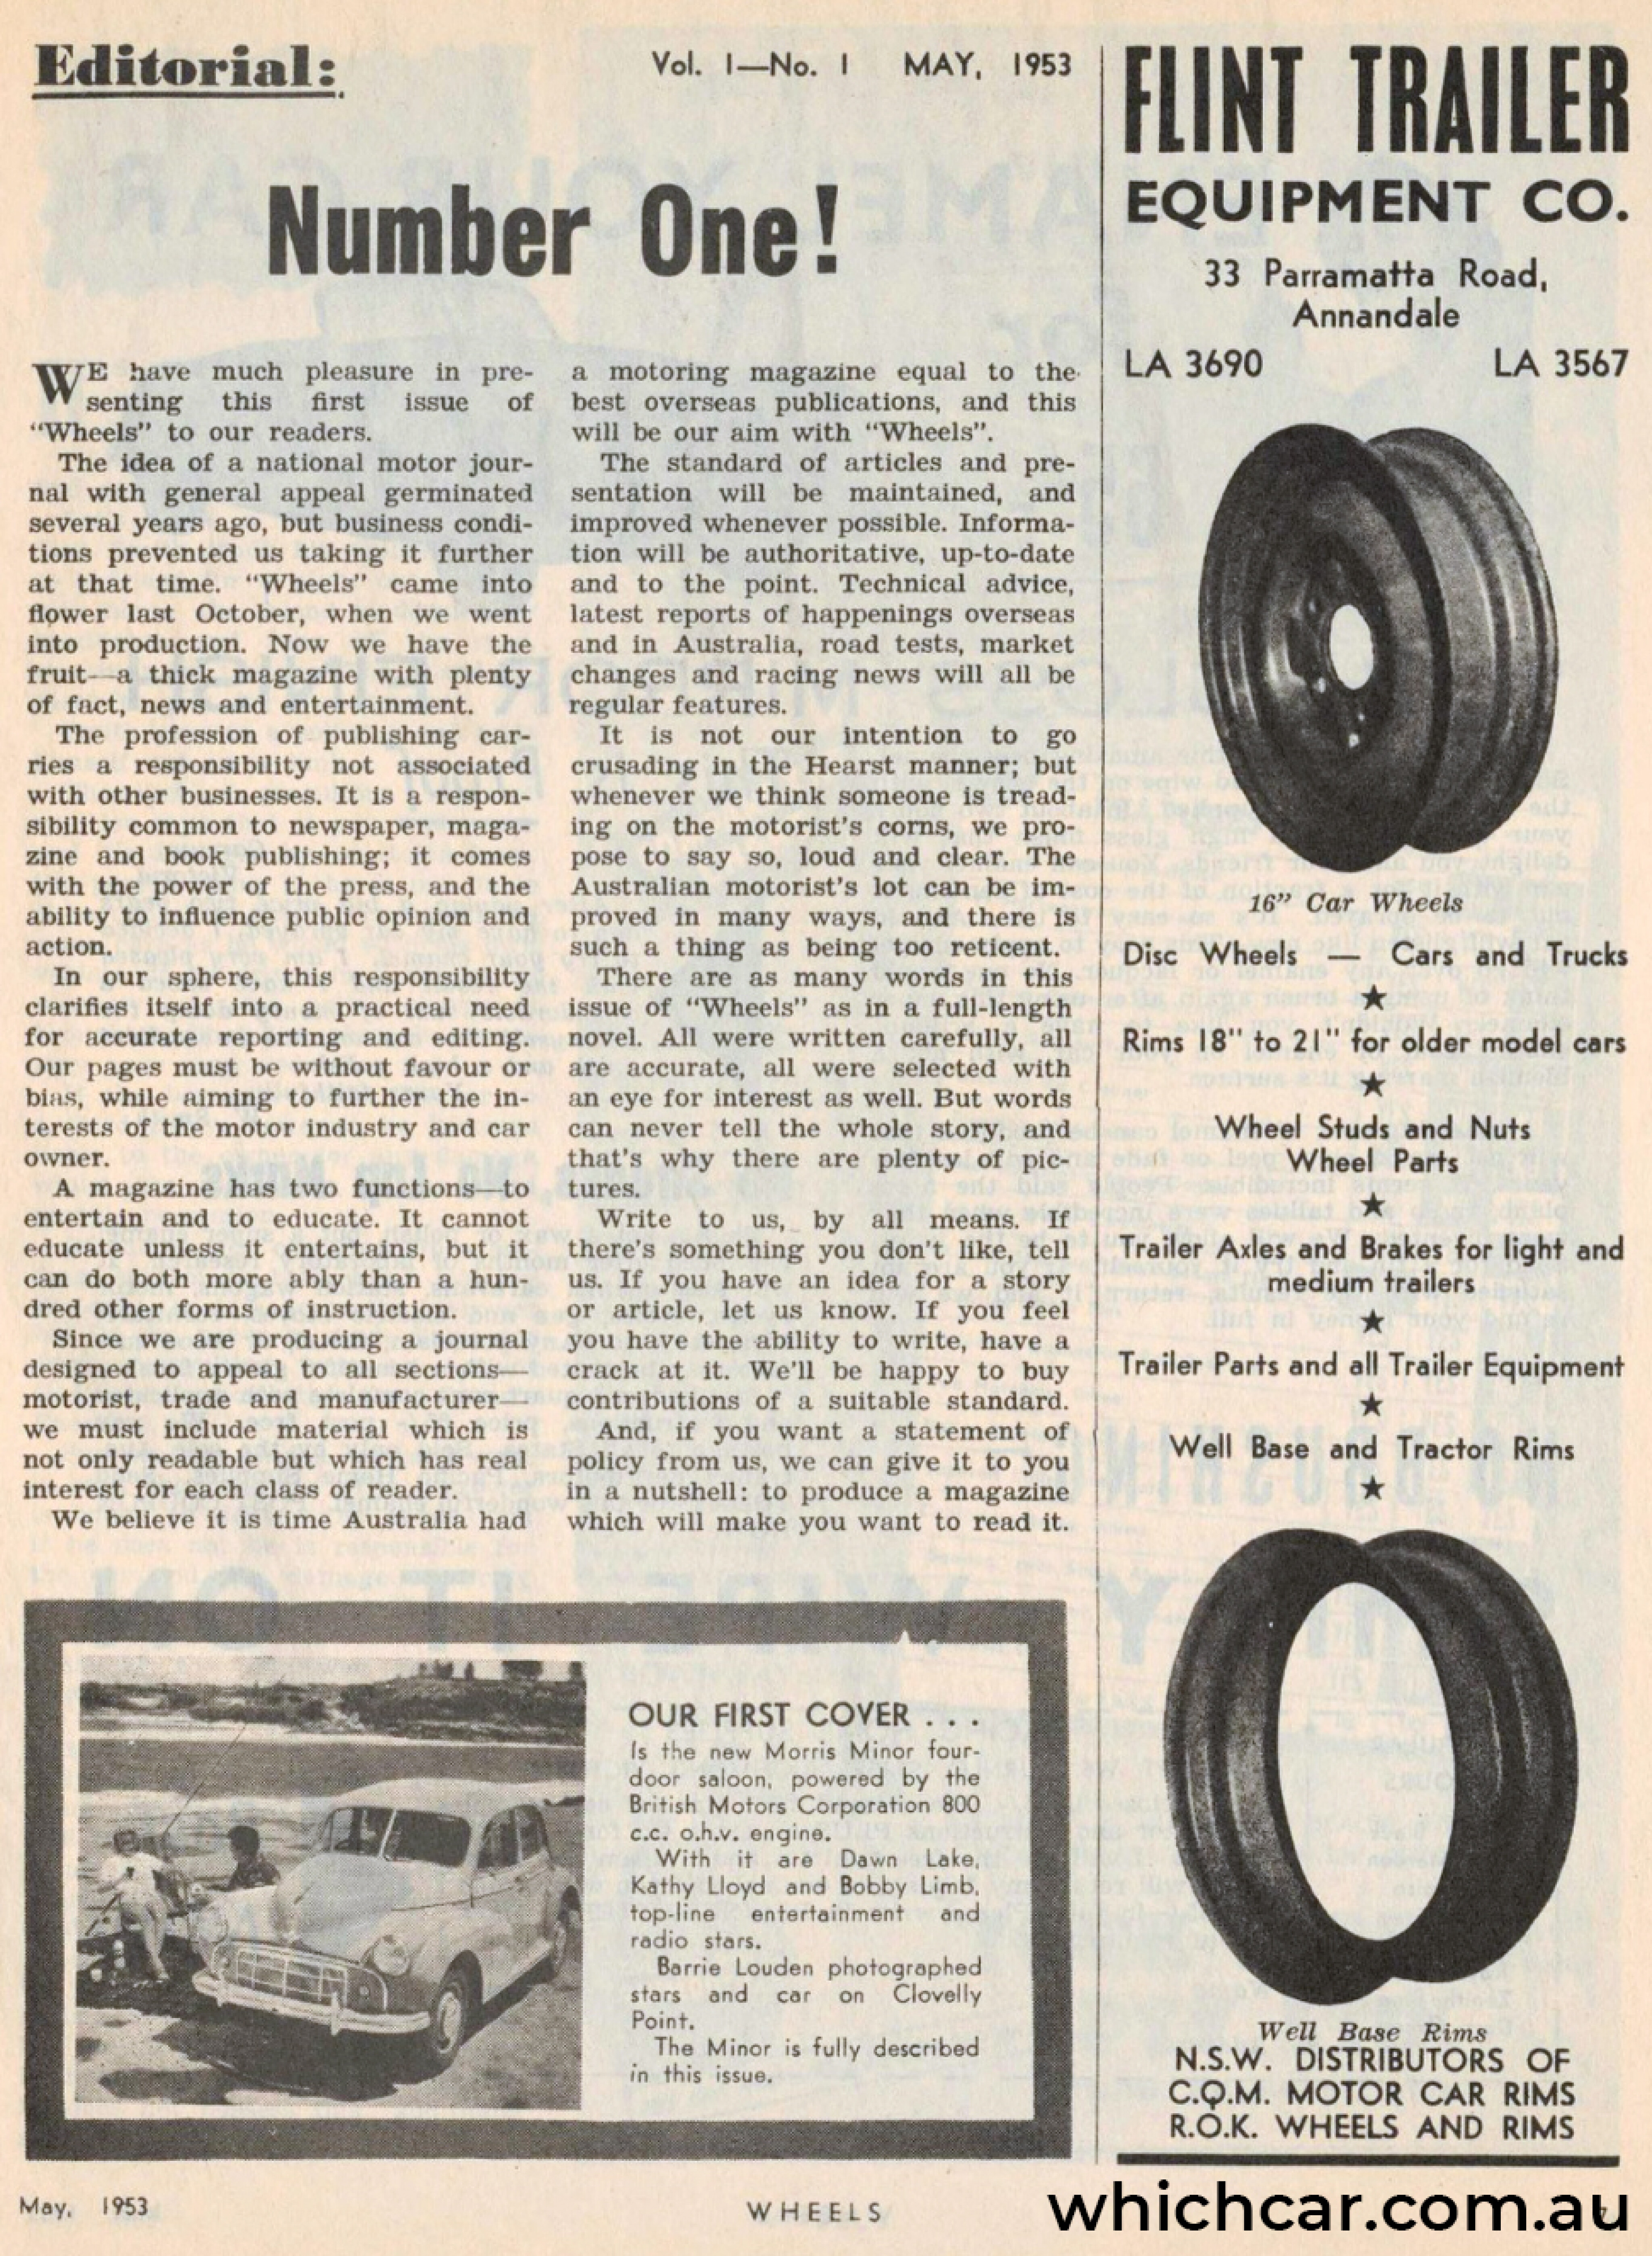 b90d1933/wheels magazine issue one editorial welcome jpg